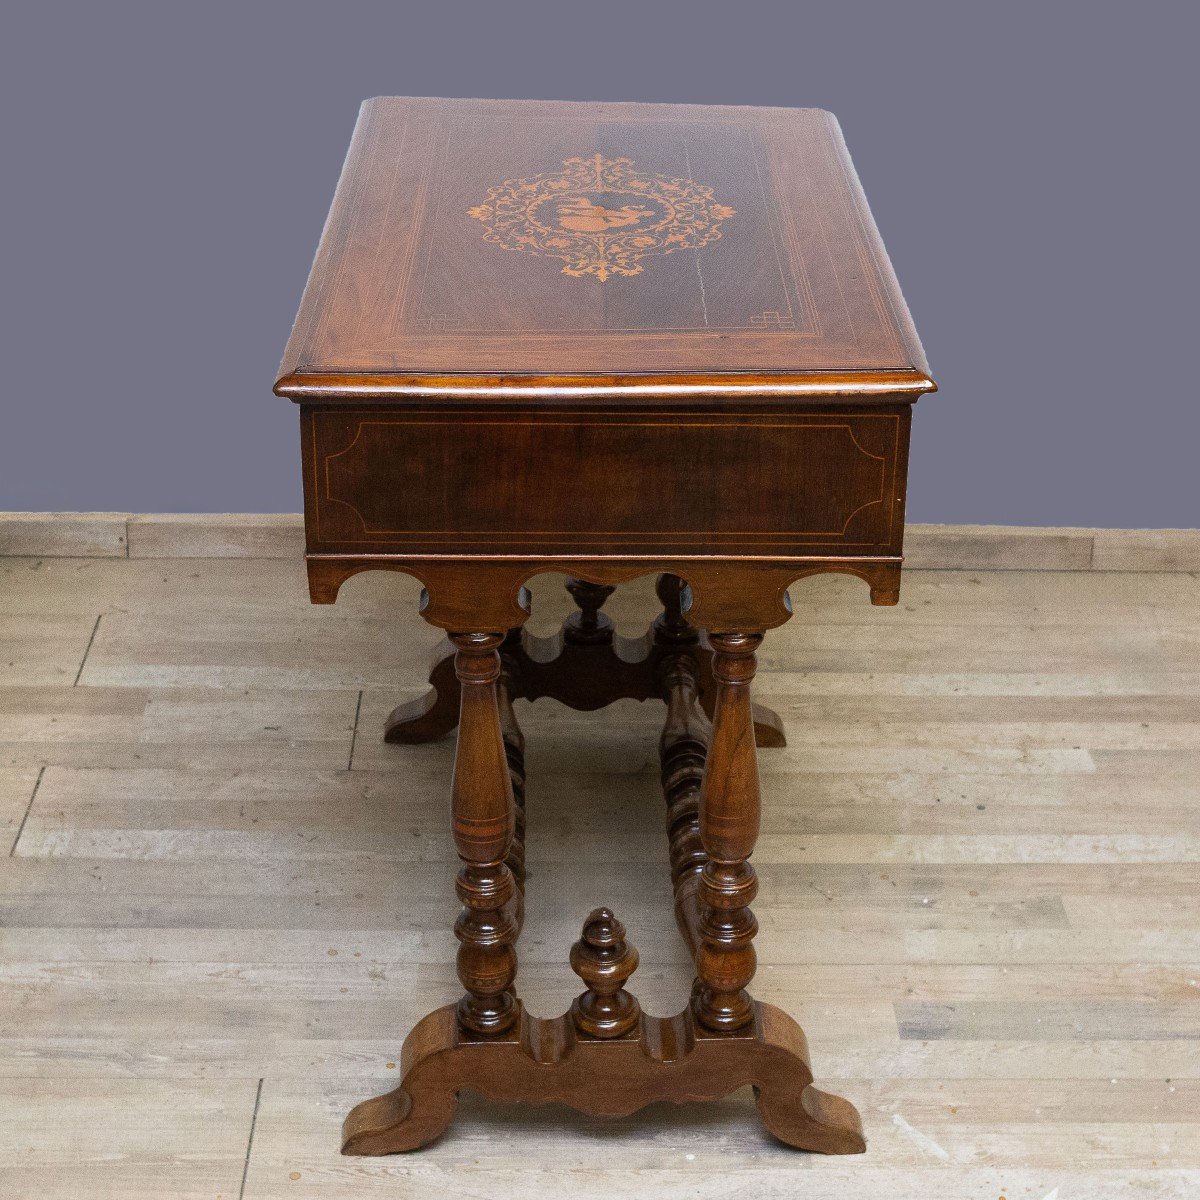 Charles X Inlaid Wooden Coffee Table, Early 19th Century Period-photo-4